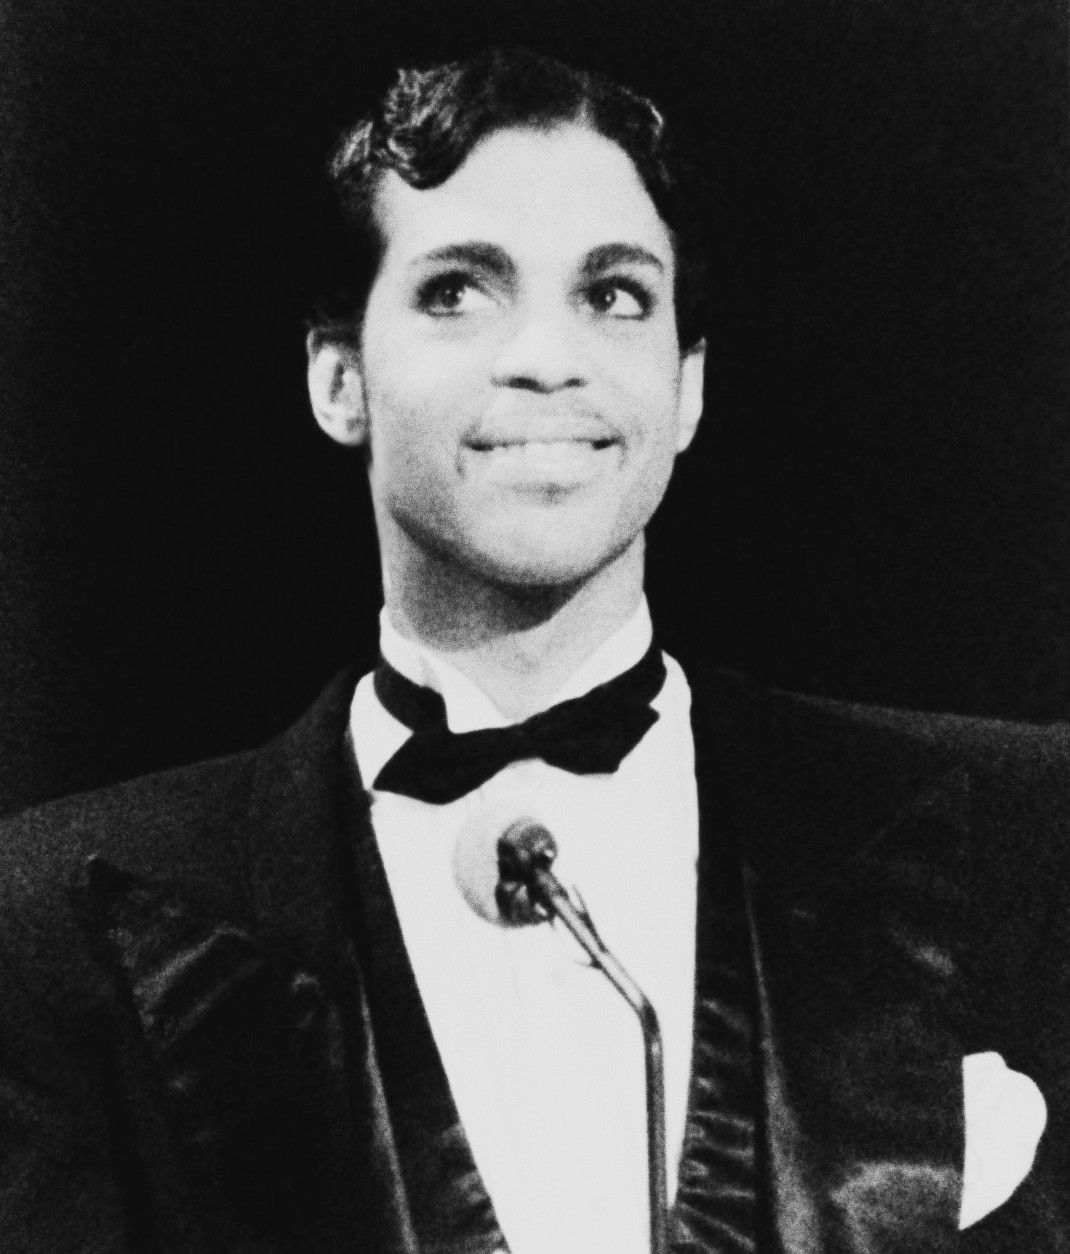 Singing Star Prince is all smiles as he addresses the audience at the American Music Awards Monday evening, Jan. 27, 1986 in Los Angeles. (AP Photo/Nick Ut)